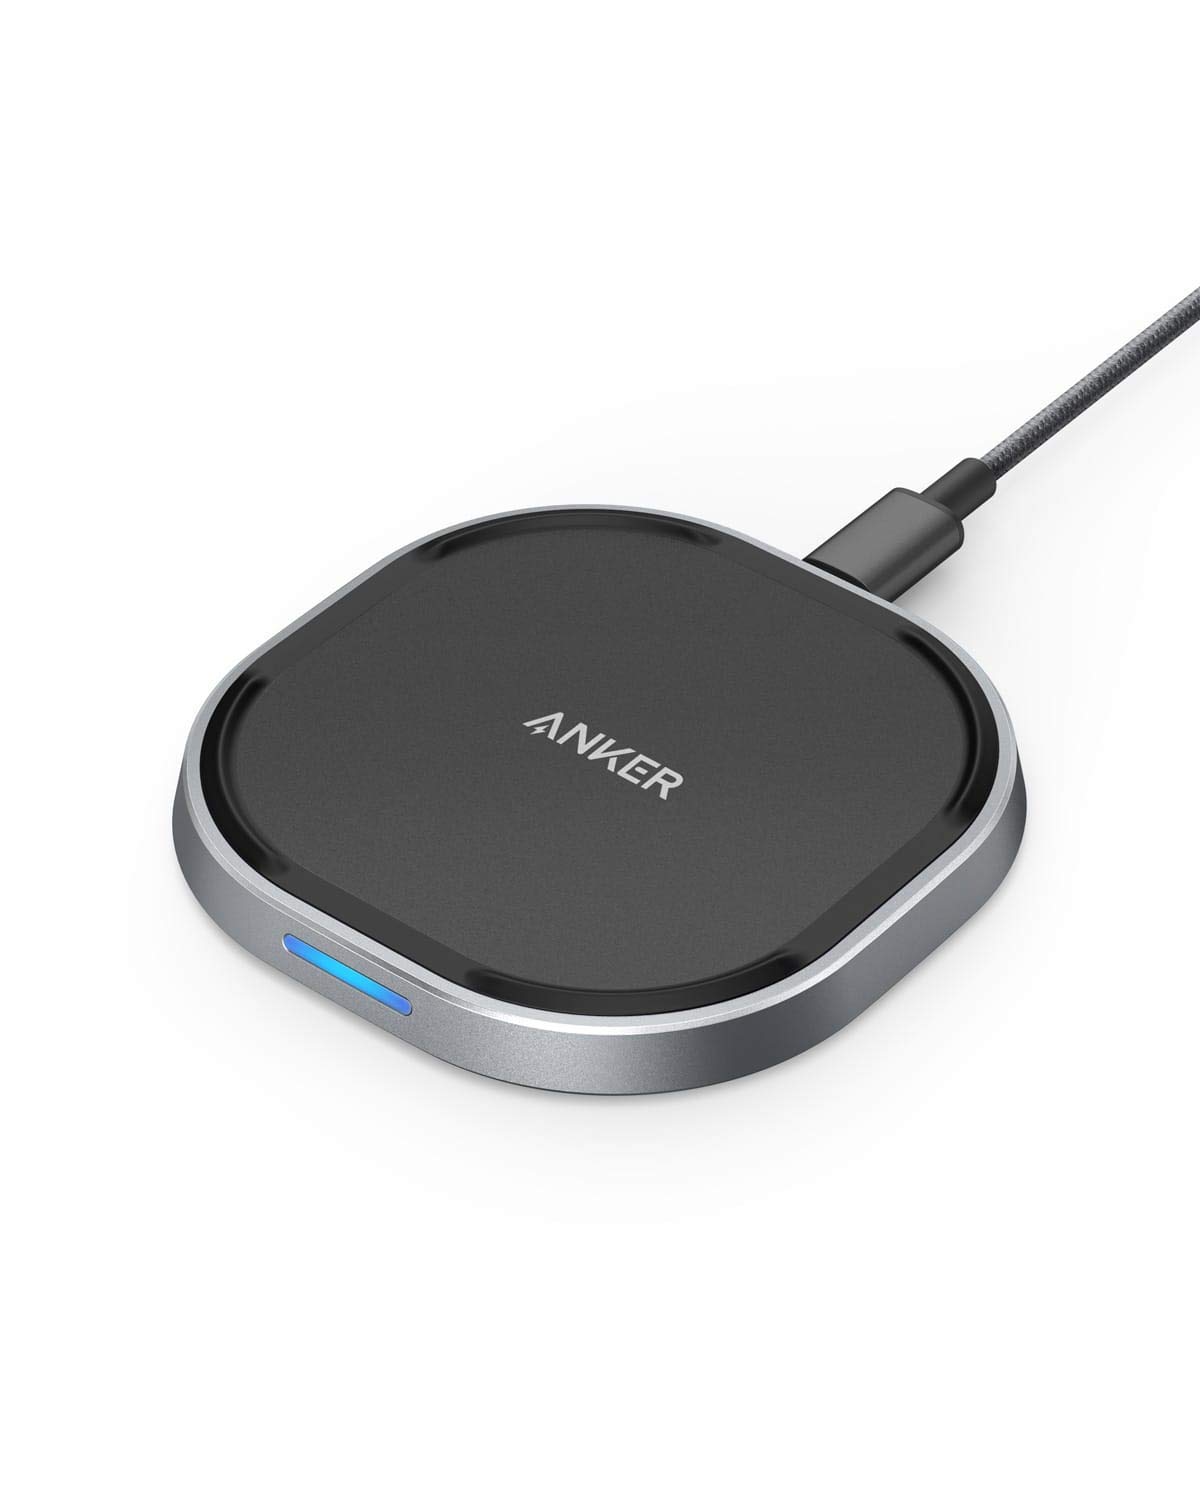 Anker Wireless Charger with USB-C, 15W Metal …